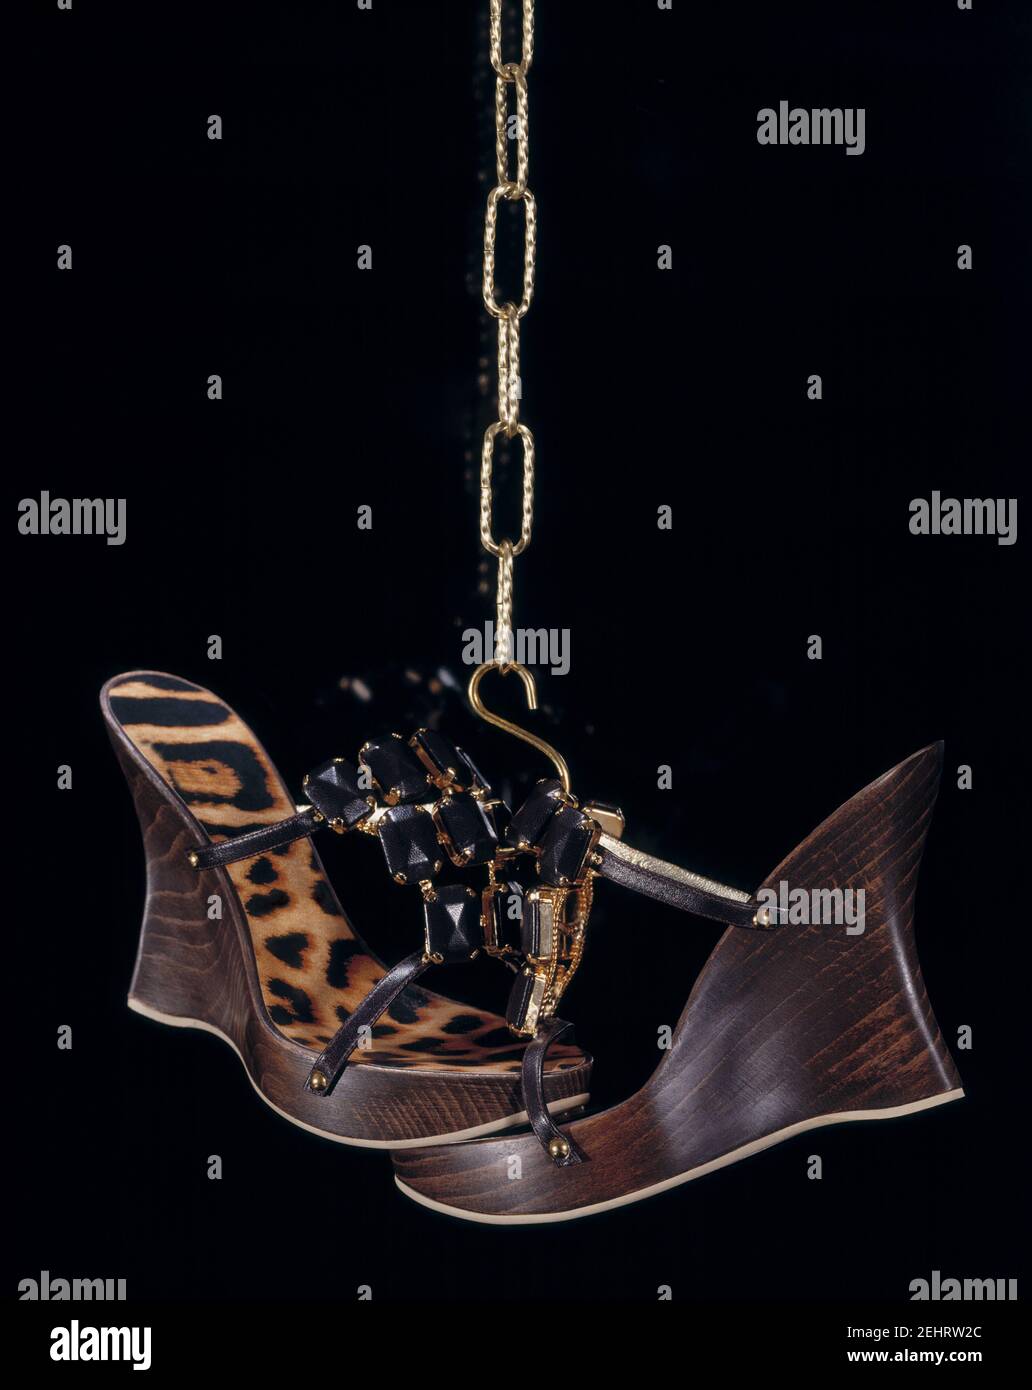 Elegant composition of two women's sandals with black stones and leopard sole, hanging on a gold chain. Stock Photo